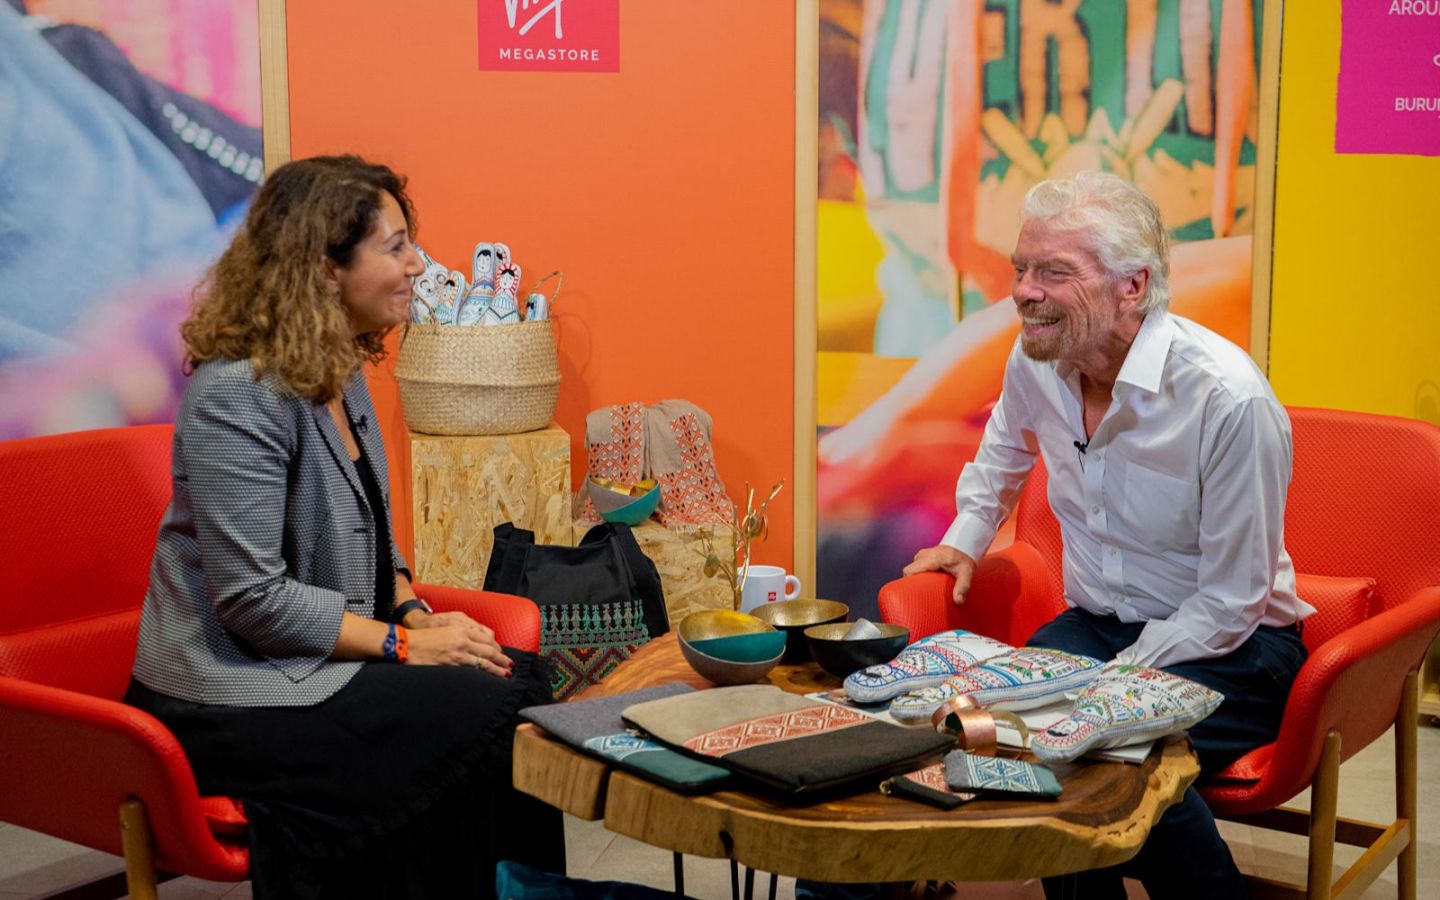 Richard Branson sat down with a lady laughing with a table of stock in front of them for Virgin Megastore in Dubai